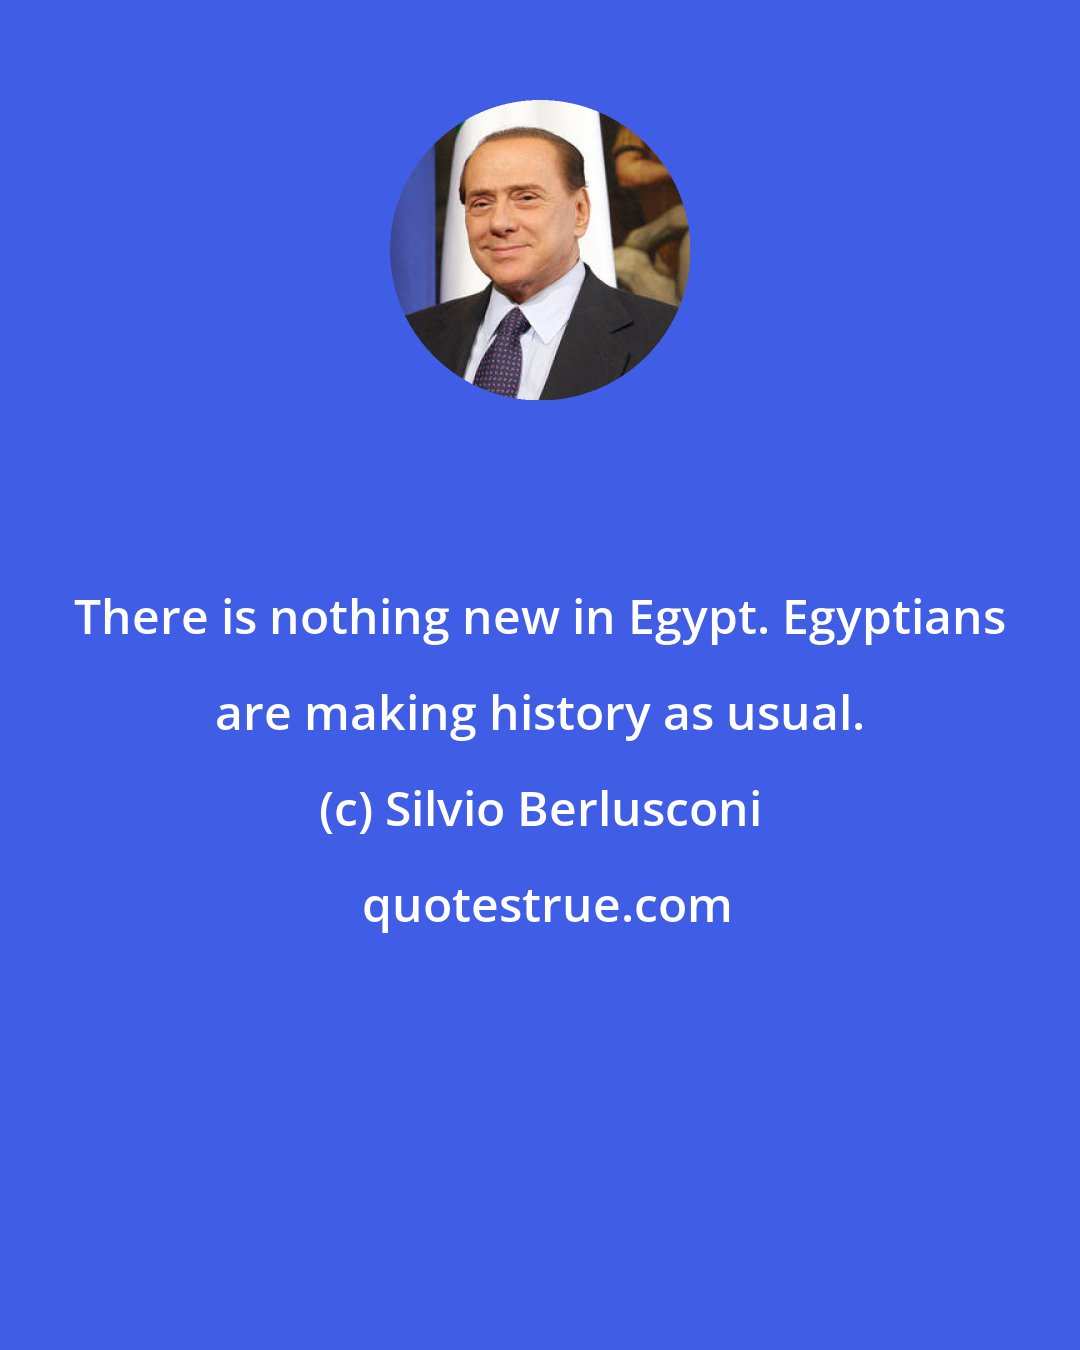 Silvio Berlusconi: There is nothing new in Egypt. Egyptians are making history as usual.